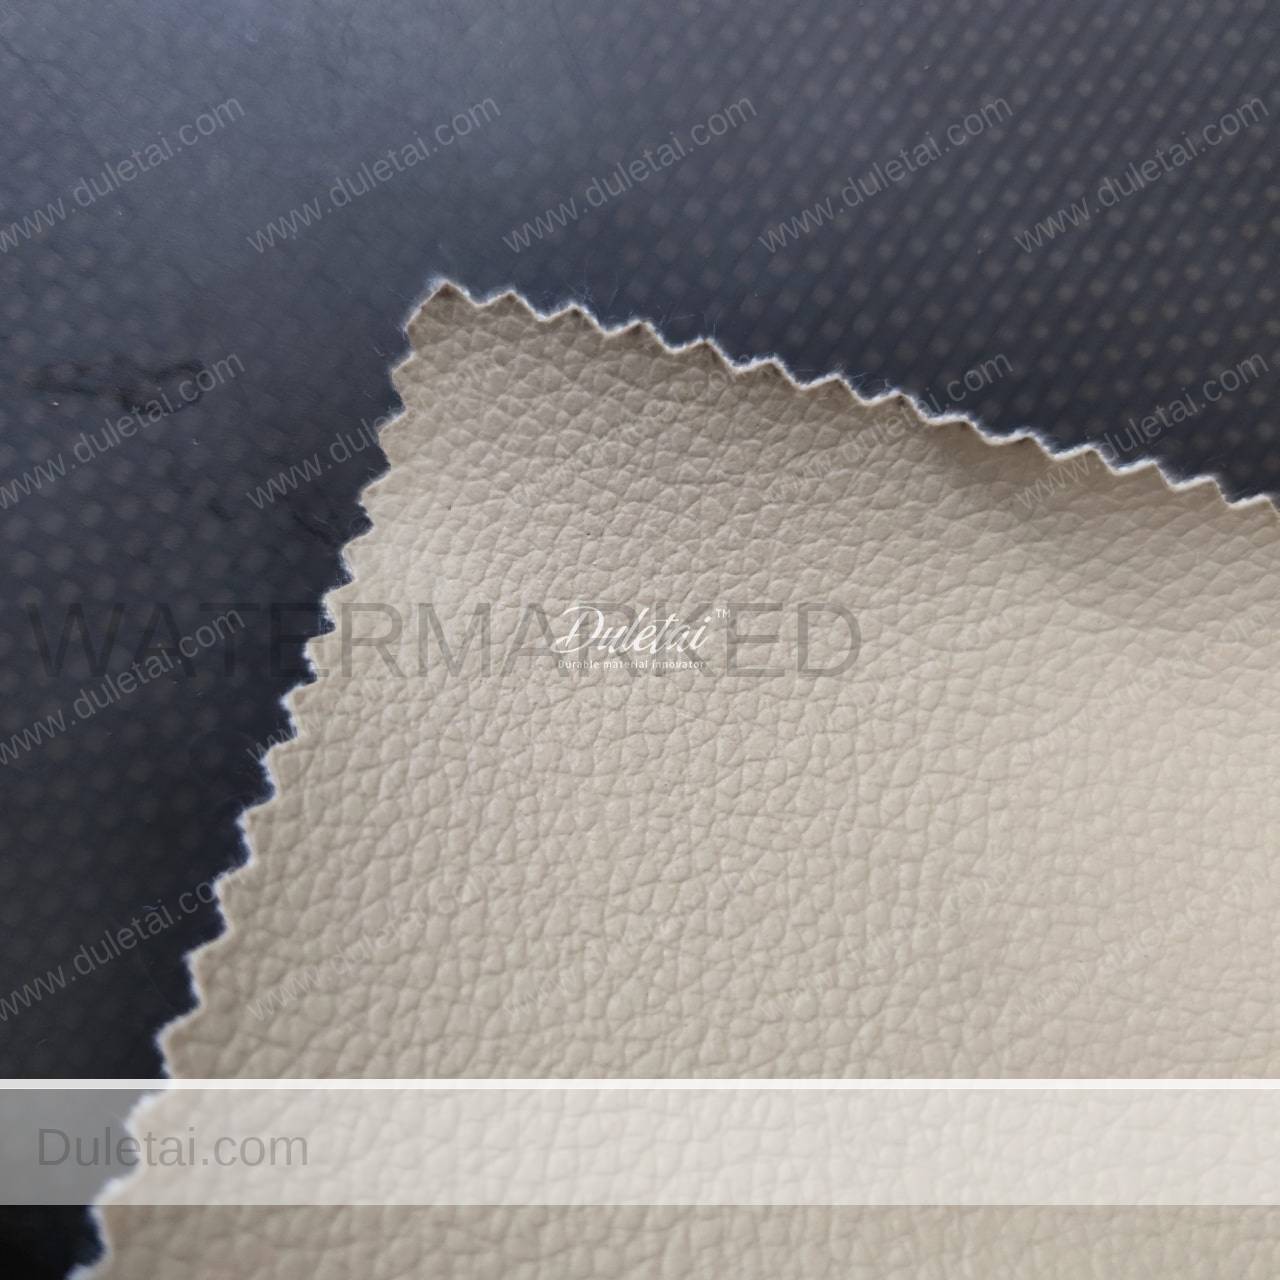 Faux Leather pvc Vinyl Synthetic Leather artificial pvc leather